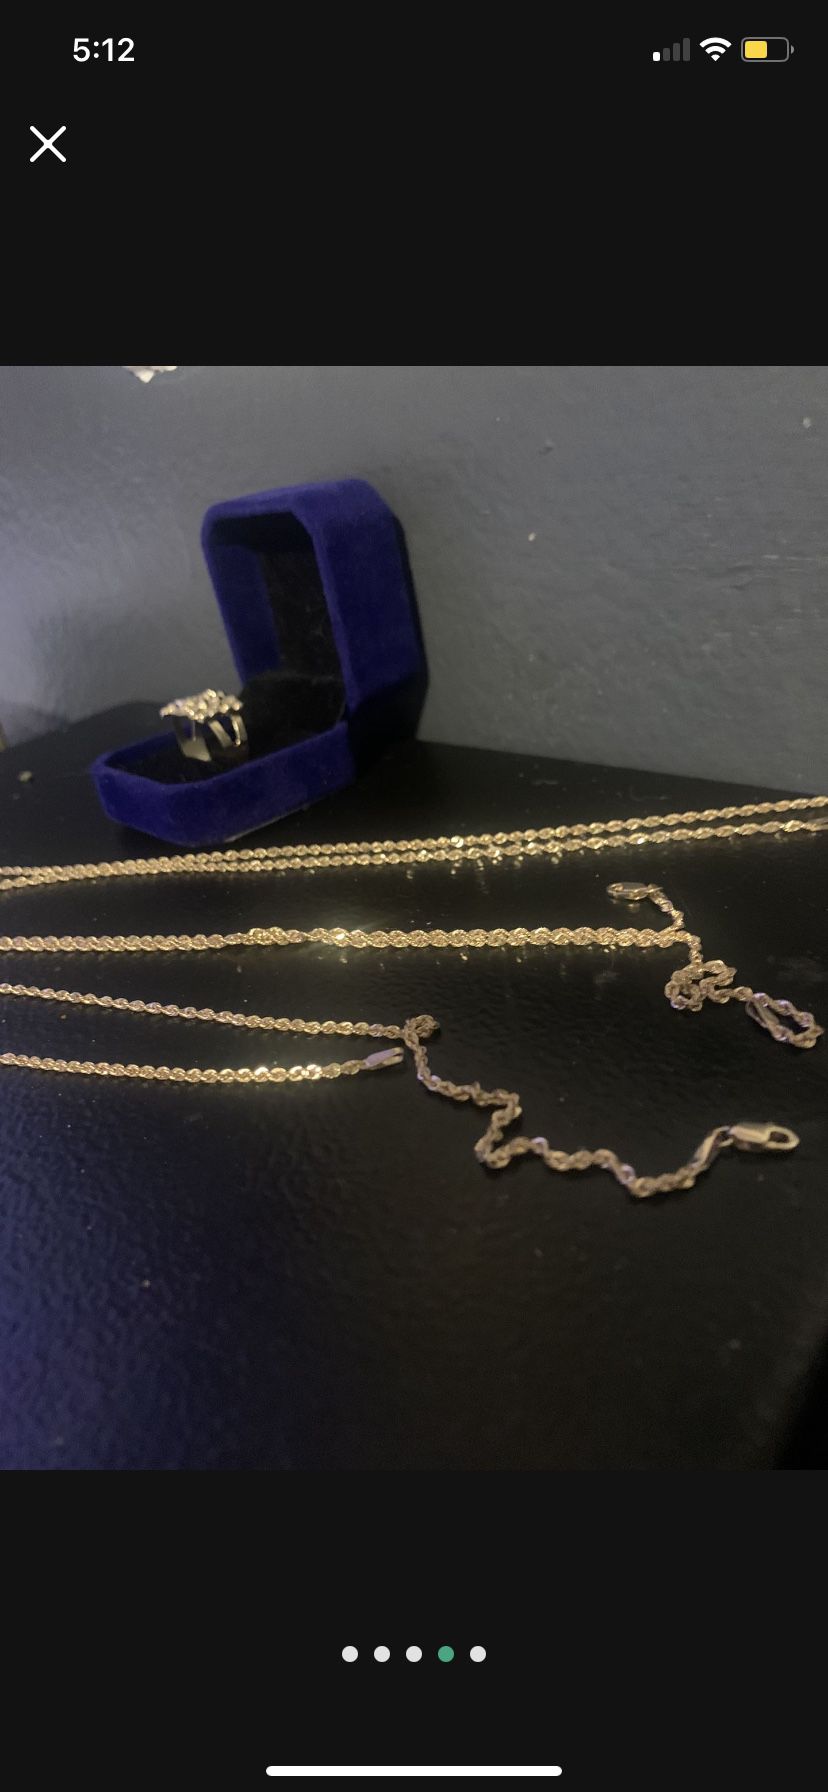 10k Gold Rope Chains And Nugget Ring for Sale in Riverside, CA - OfferUp